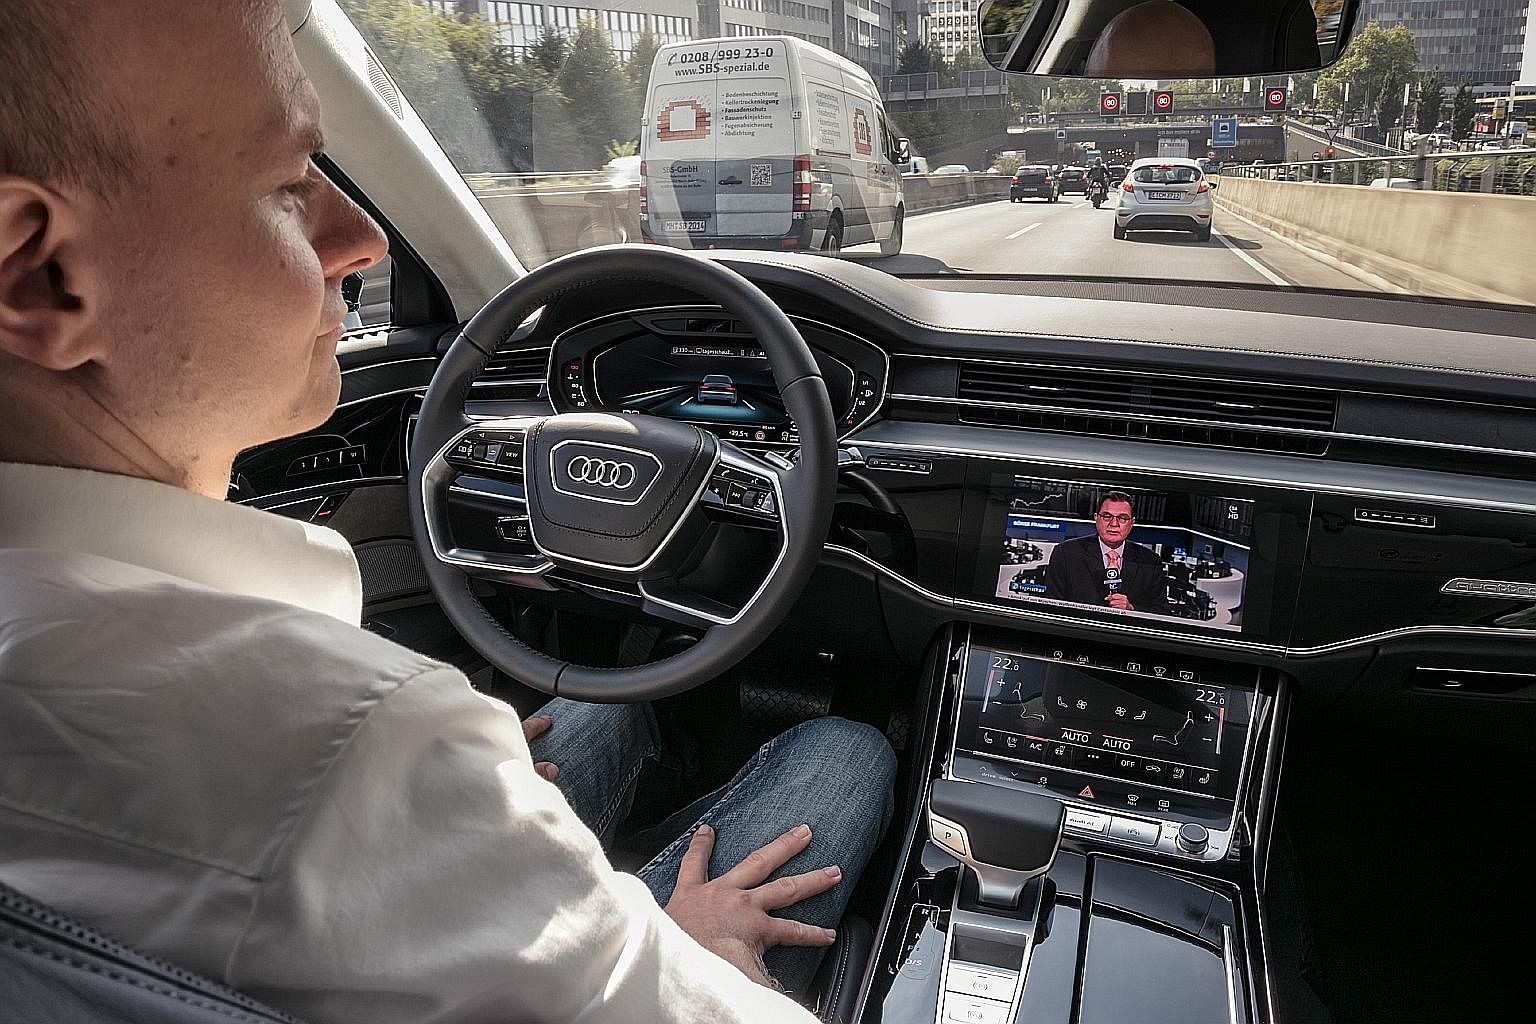 Audi A8's hands-free feature may allow the driver to watch a movie on the car's infotainment screen.